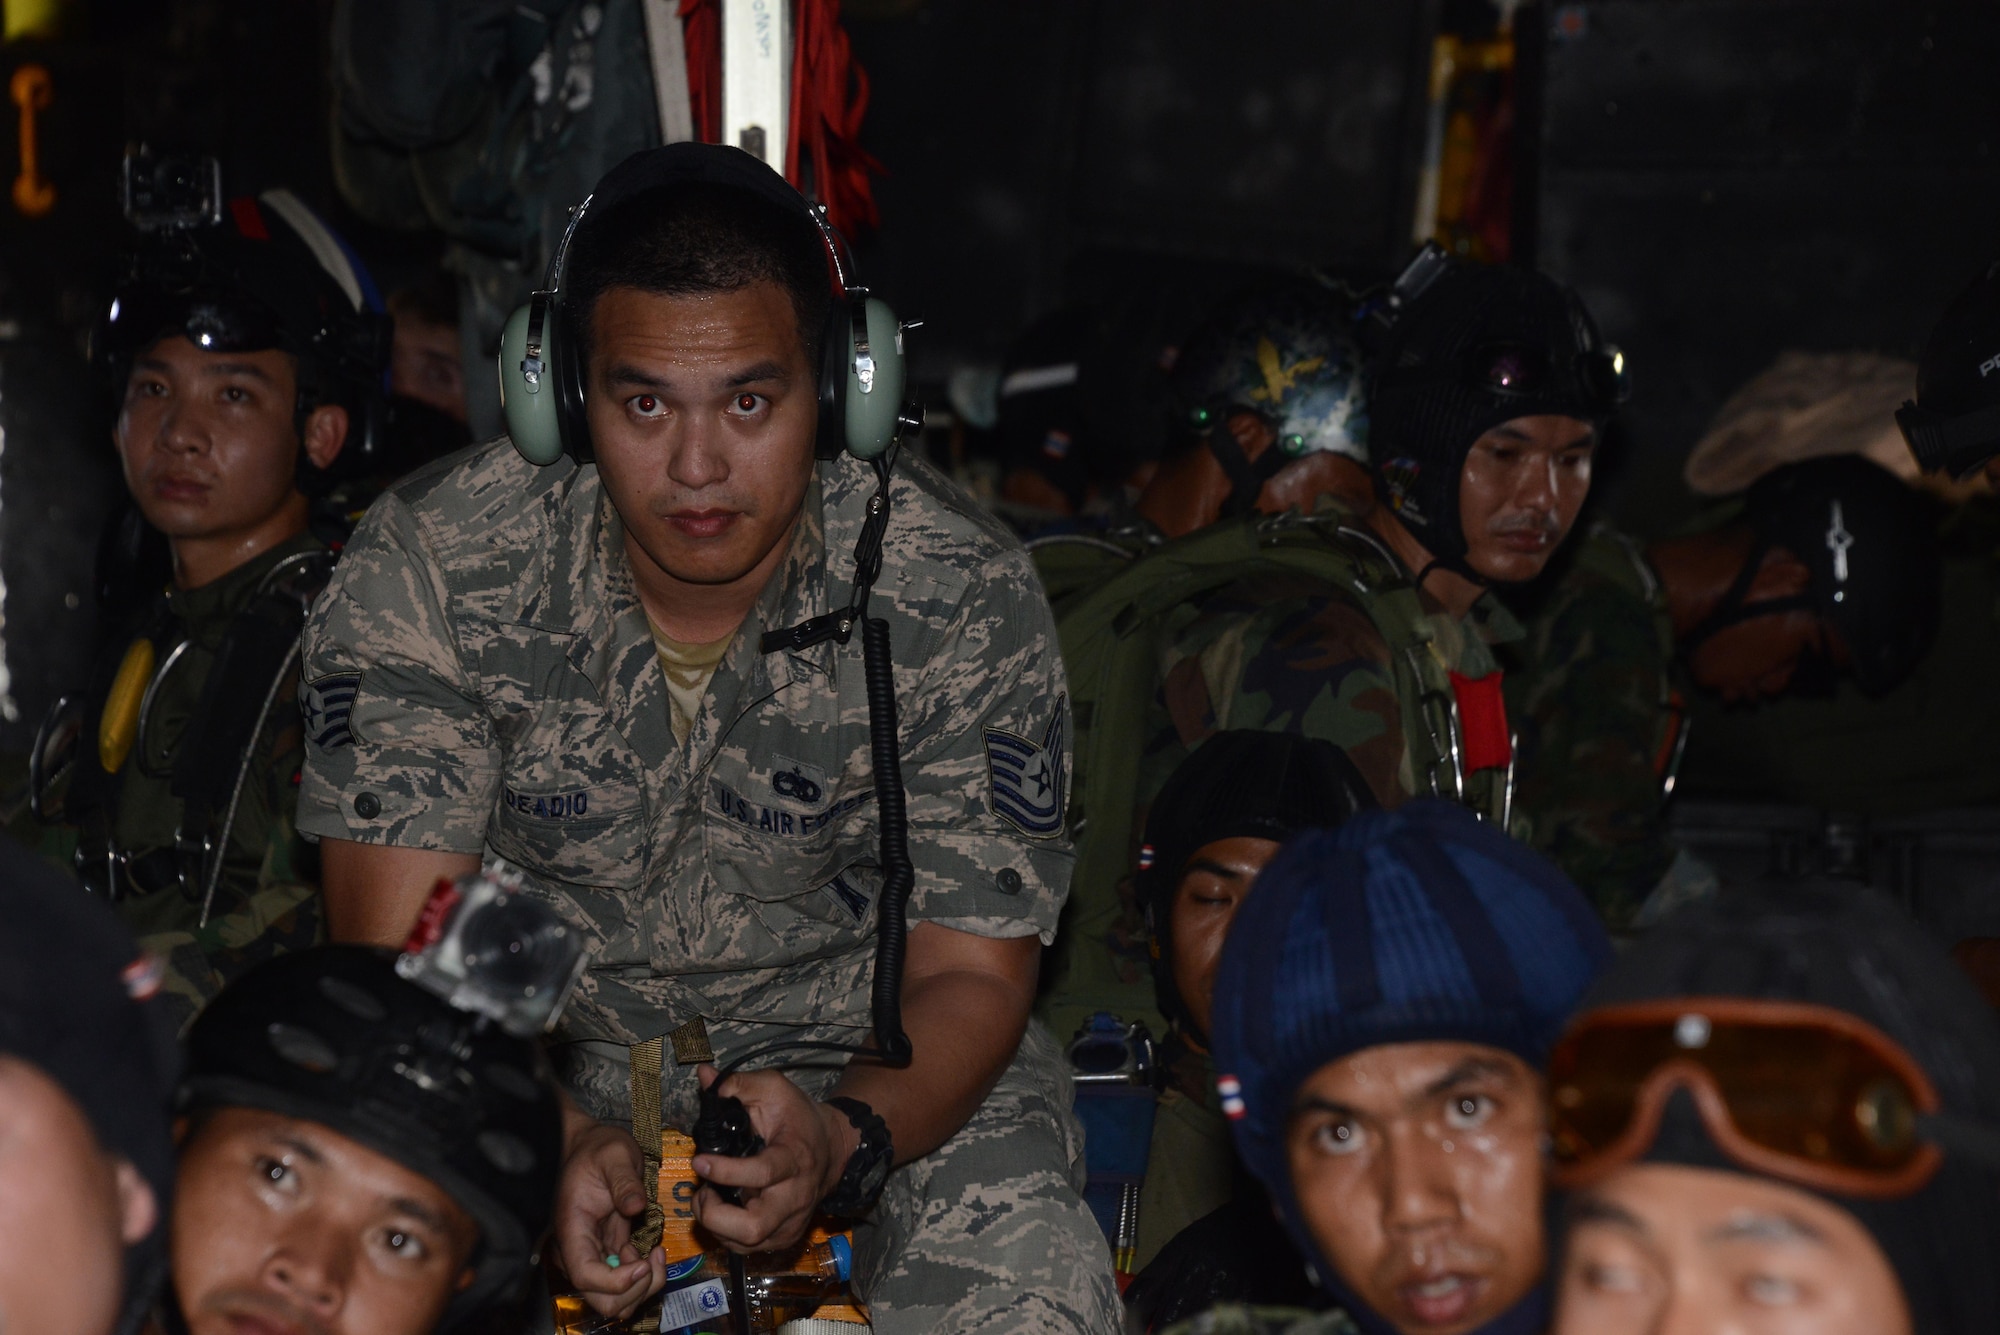 Second from left, Tech. Sgt. Edward Deadio, 31st Munitions Squadron, helps translate between the U.S. military and the Thai military during a jump briefing Feb. 16, 2015.  Deadio, a native Thai speaker and participant in the Language Enabled Airman Program, was sent to Cobra Gold 15-1 to provide language support for the 353rd Special Operations Group.  During the 2-week exercise, Deadio helped bridge the language and culture gap between U. S. and Thai military.   (U.S. Air Force photo by Tech. Sgt. Kristine Dreyer)